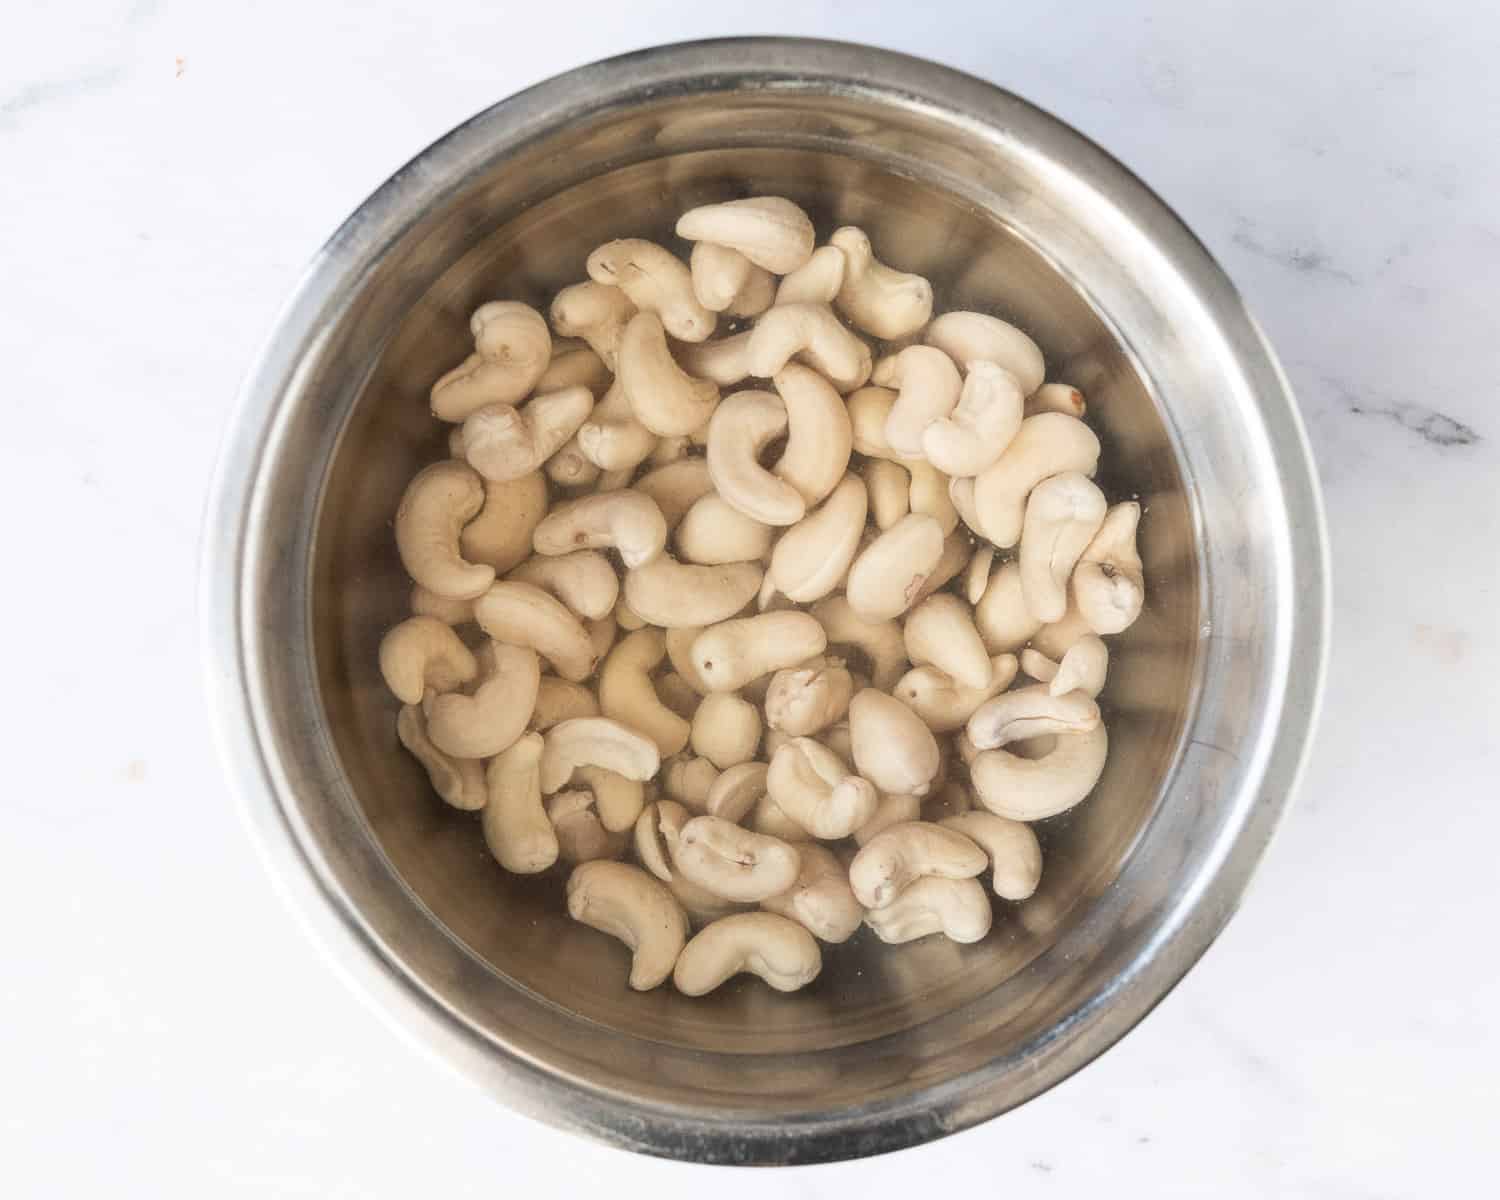 Step 1 - the cashews soaking in a metal bowl.